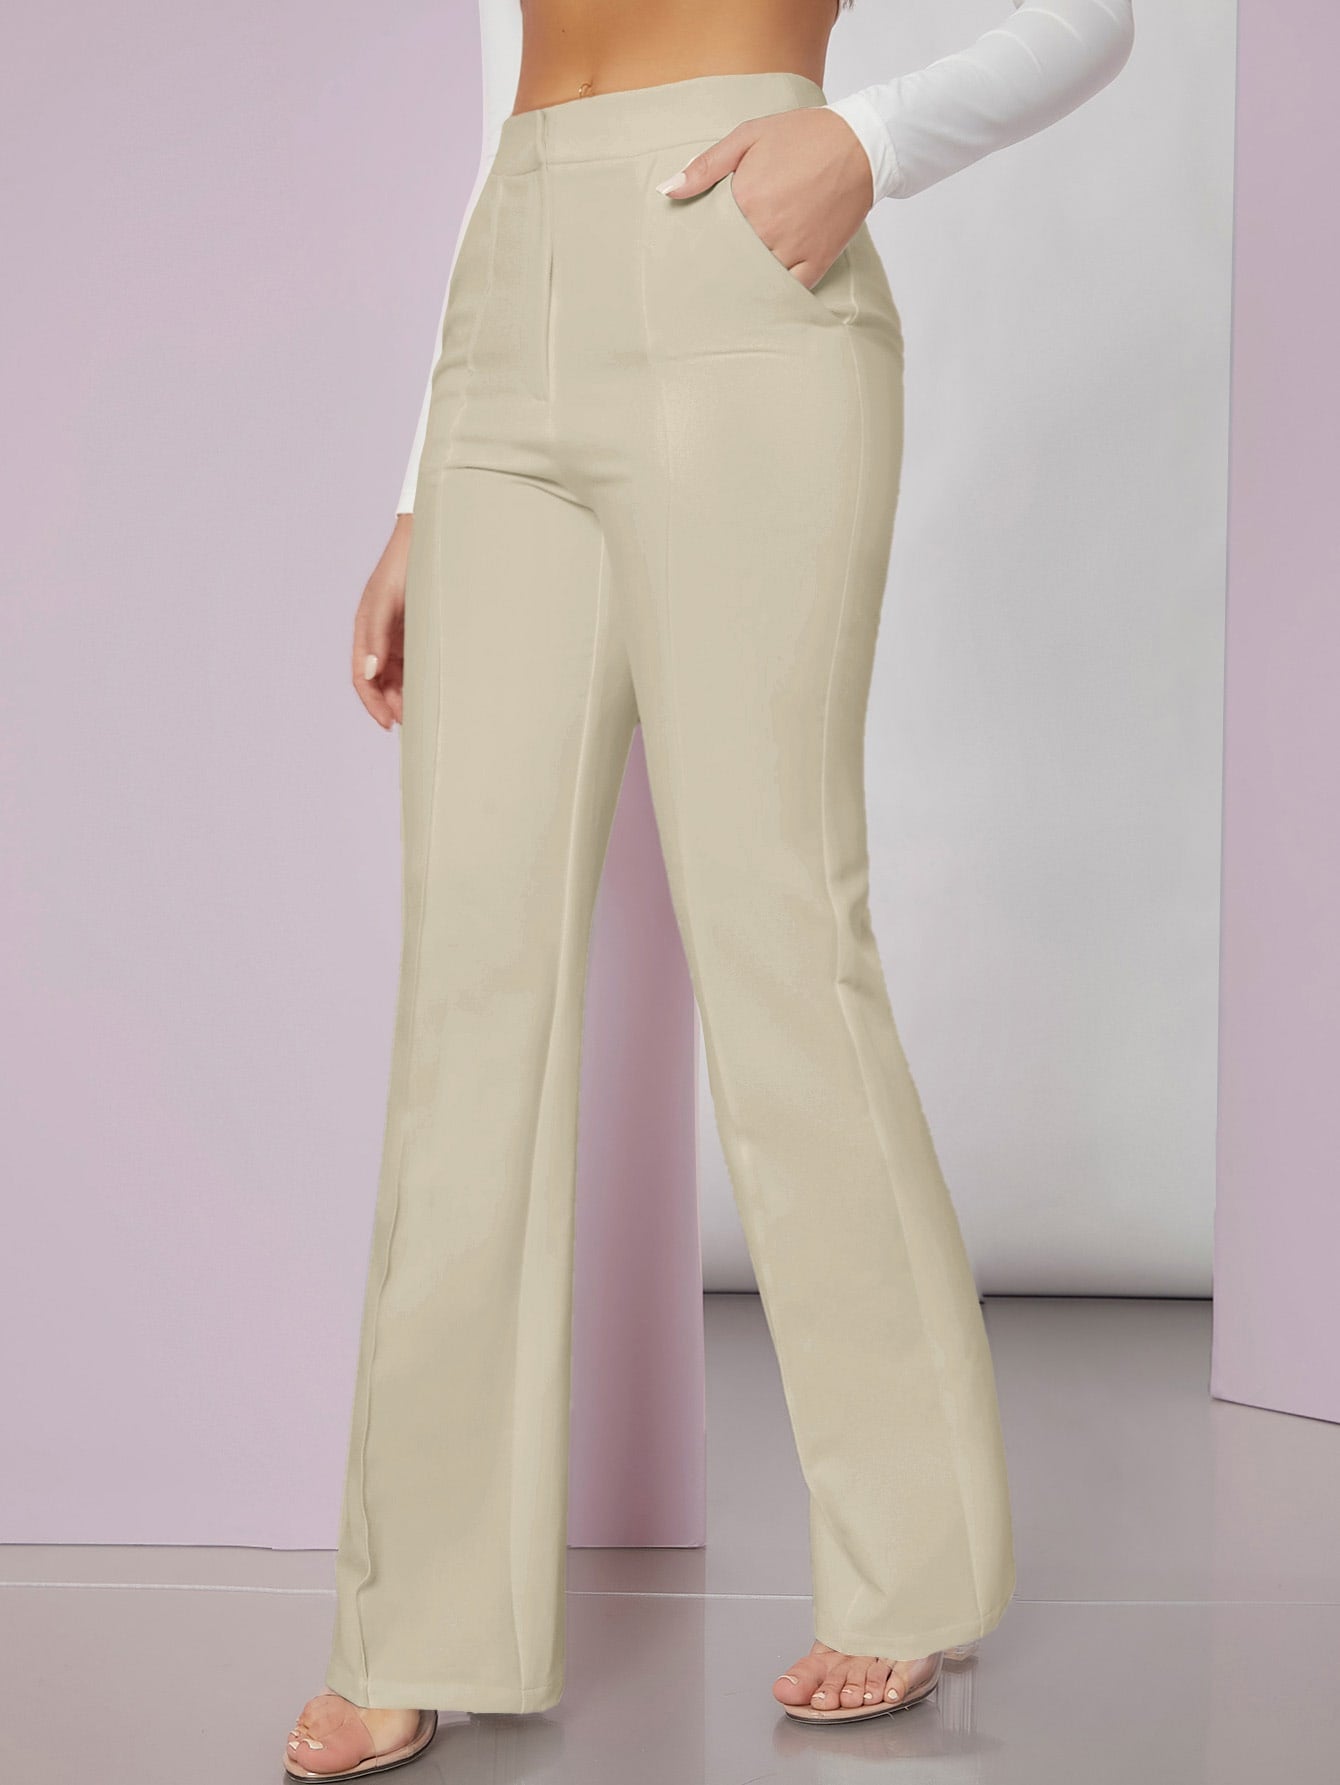 SHEIN Seam Front Tailored Pants